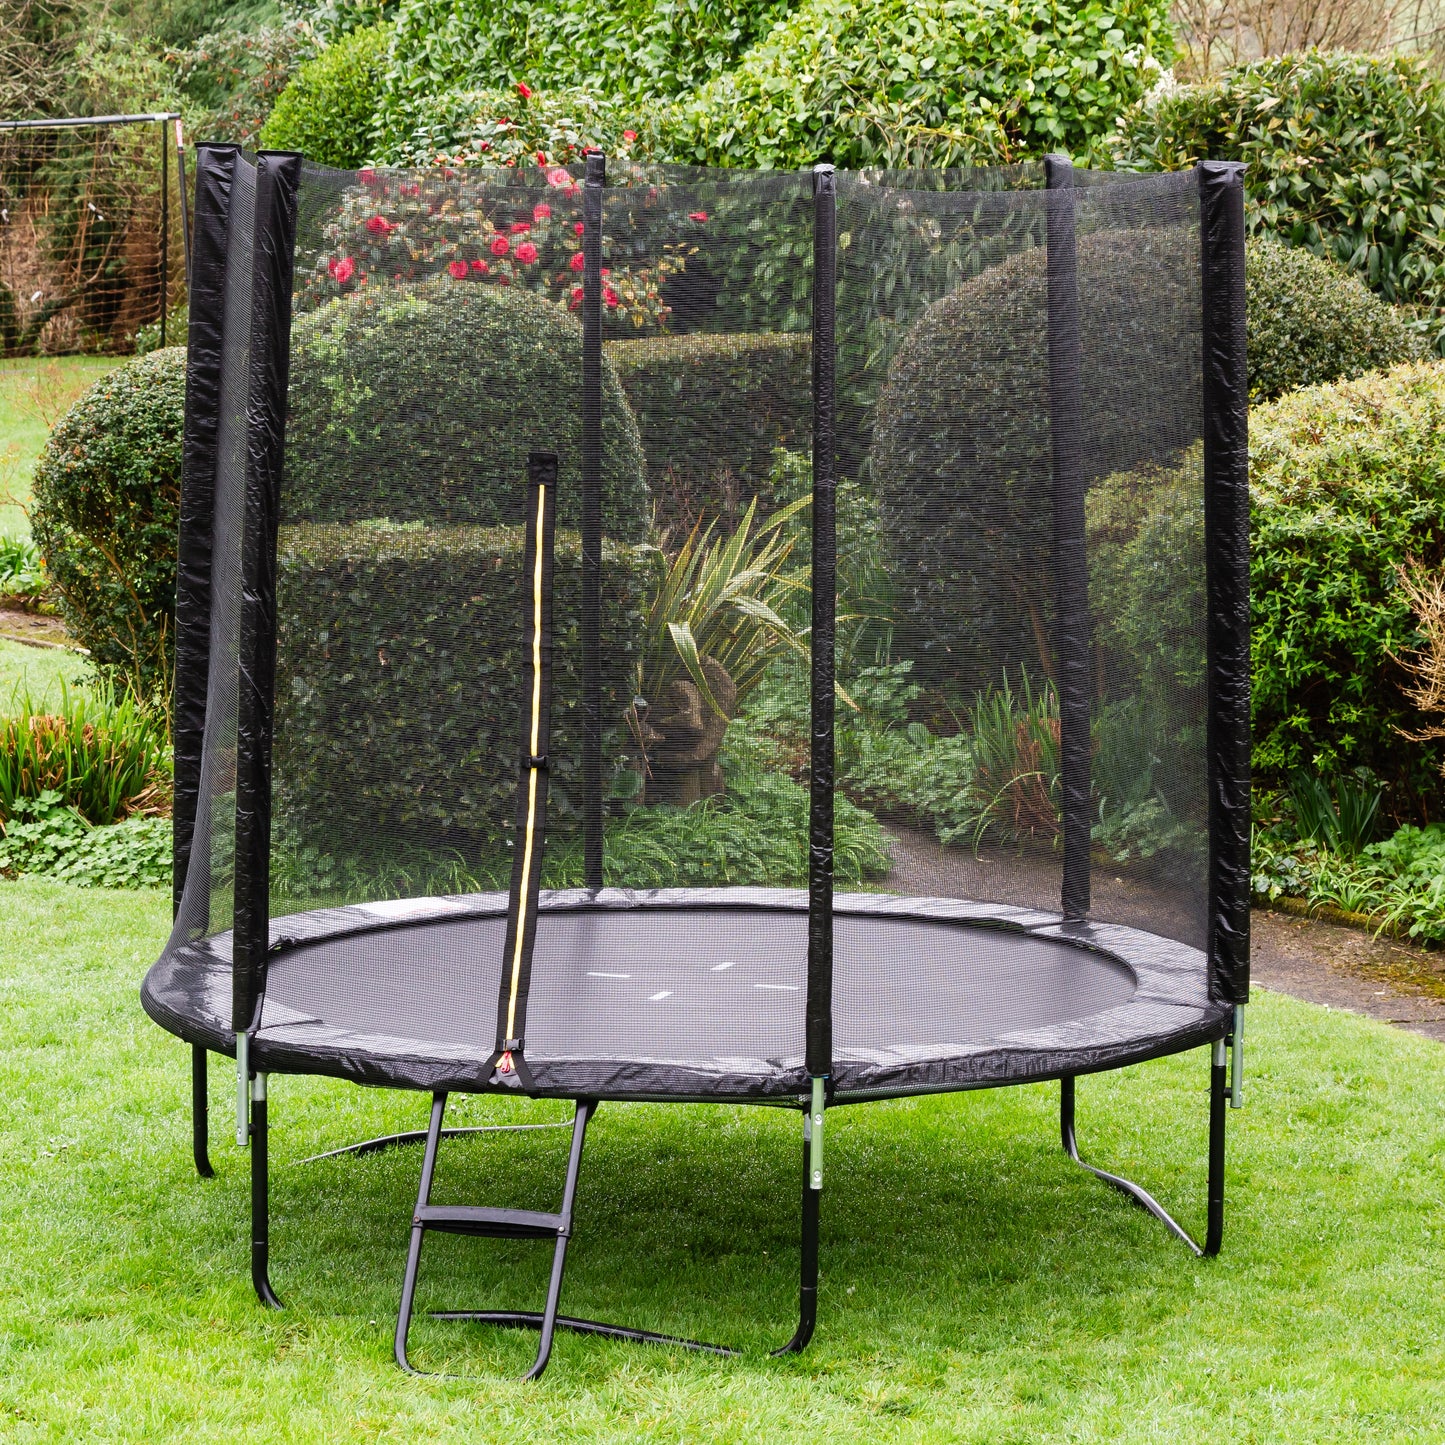 Zone 6ft trampoline package